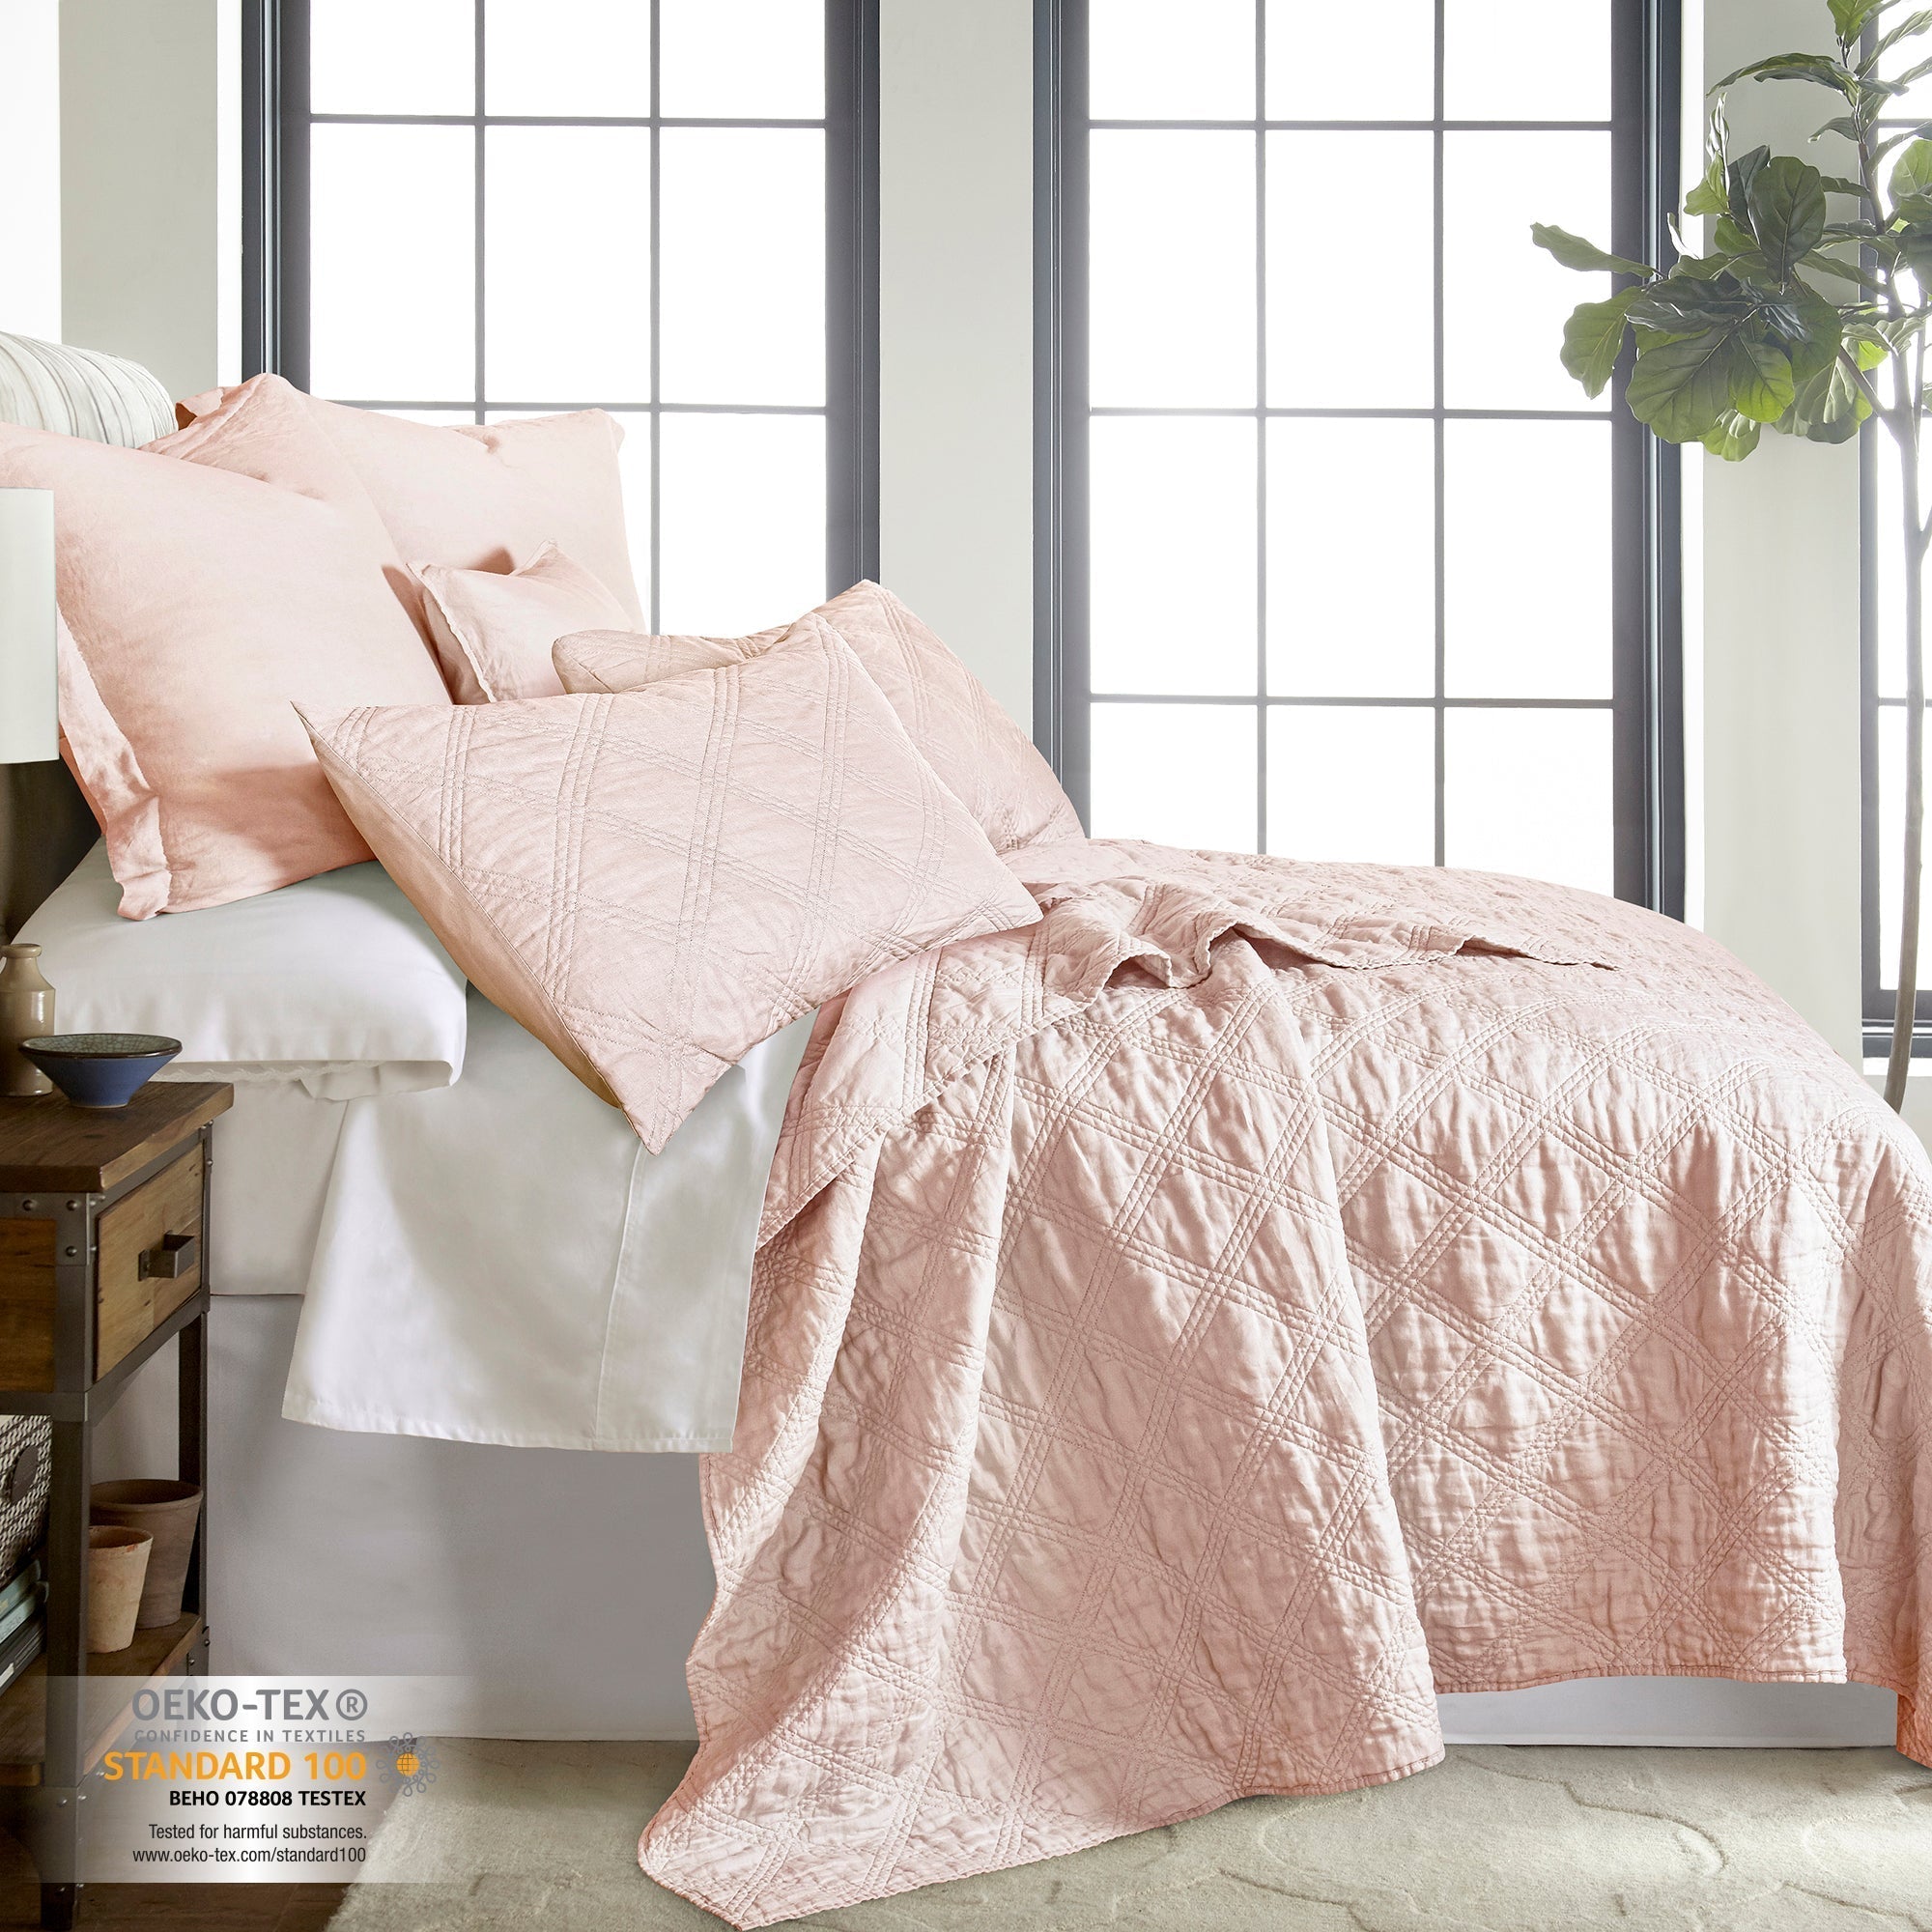 Levtex Home - 100% Linen Front/100% Cotton Back - King Quilted Sham -  Washed Linen - Light Grey - Sham Size (36 x 20in.)